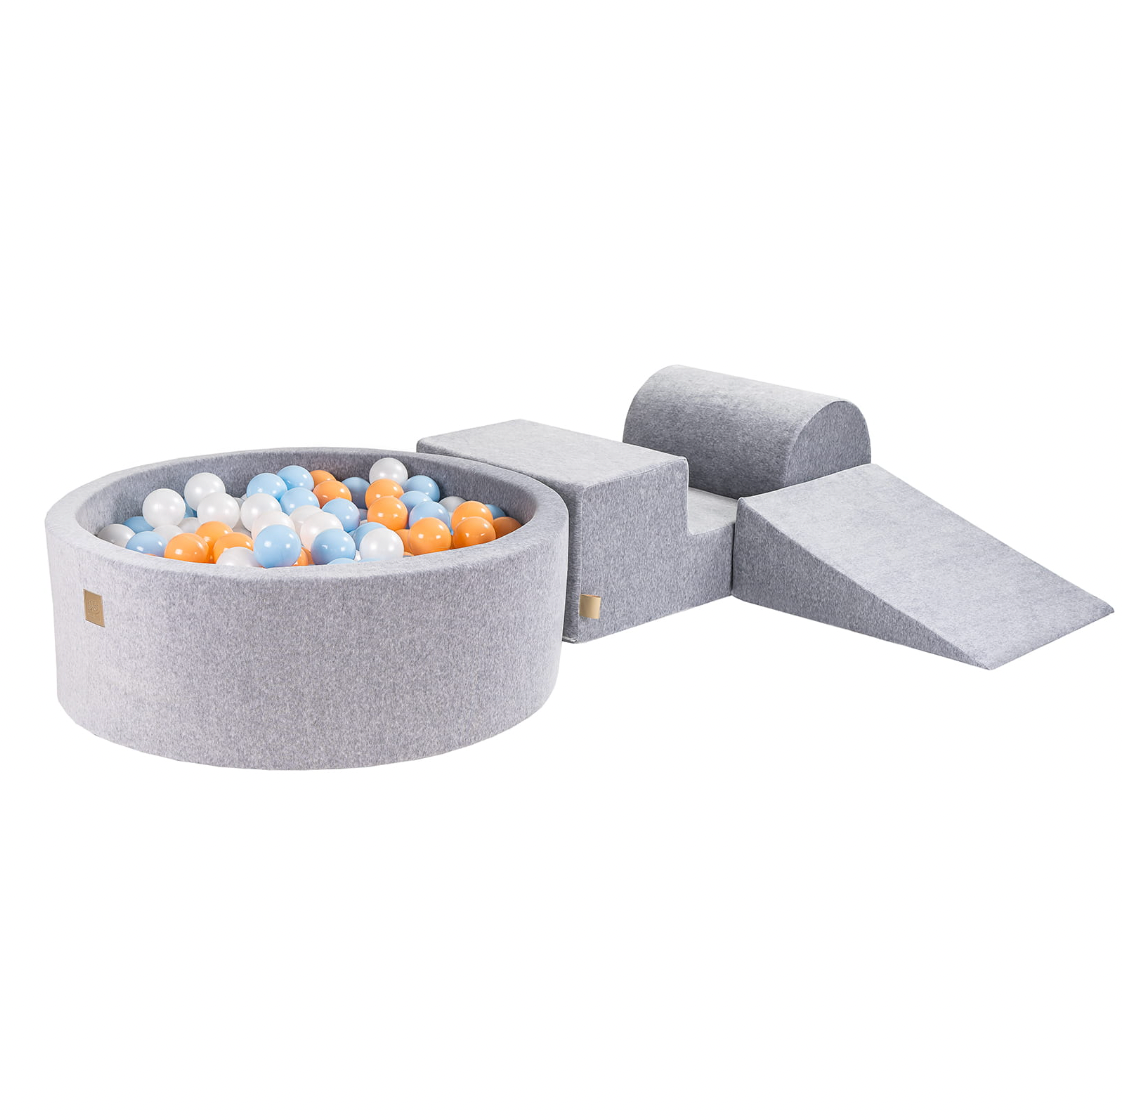 Playsystem with Ball Pit, Grey